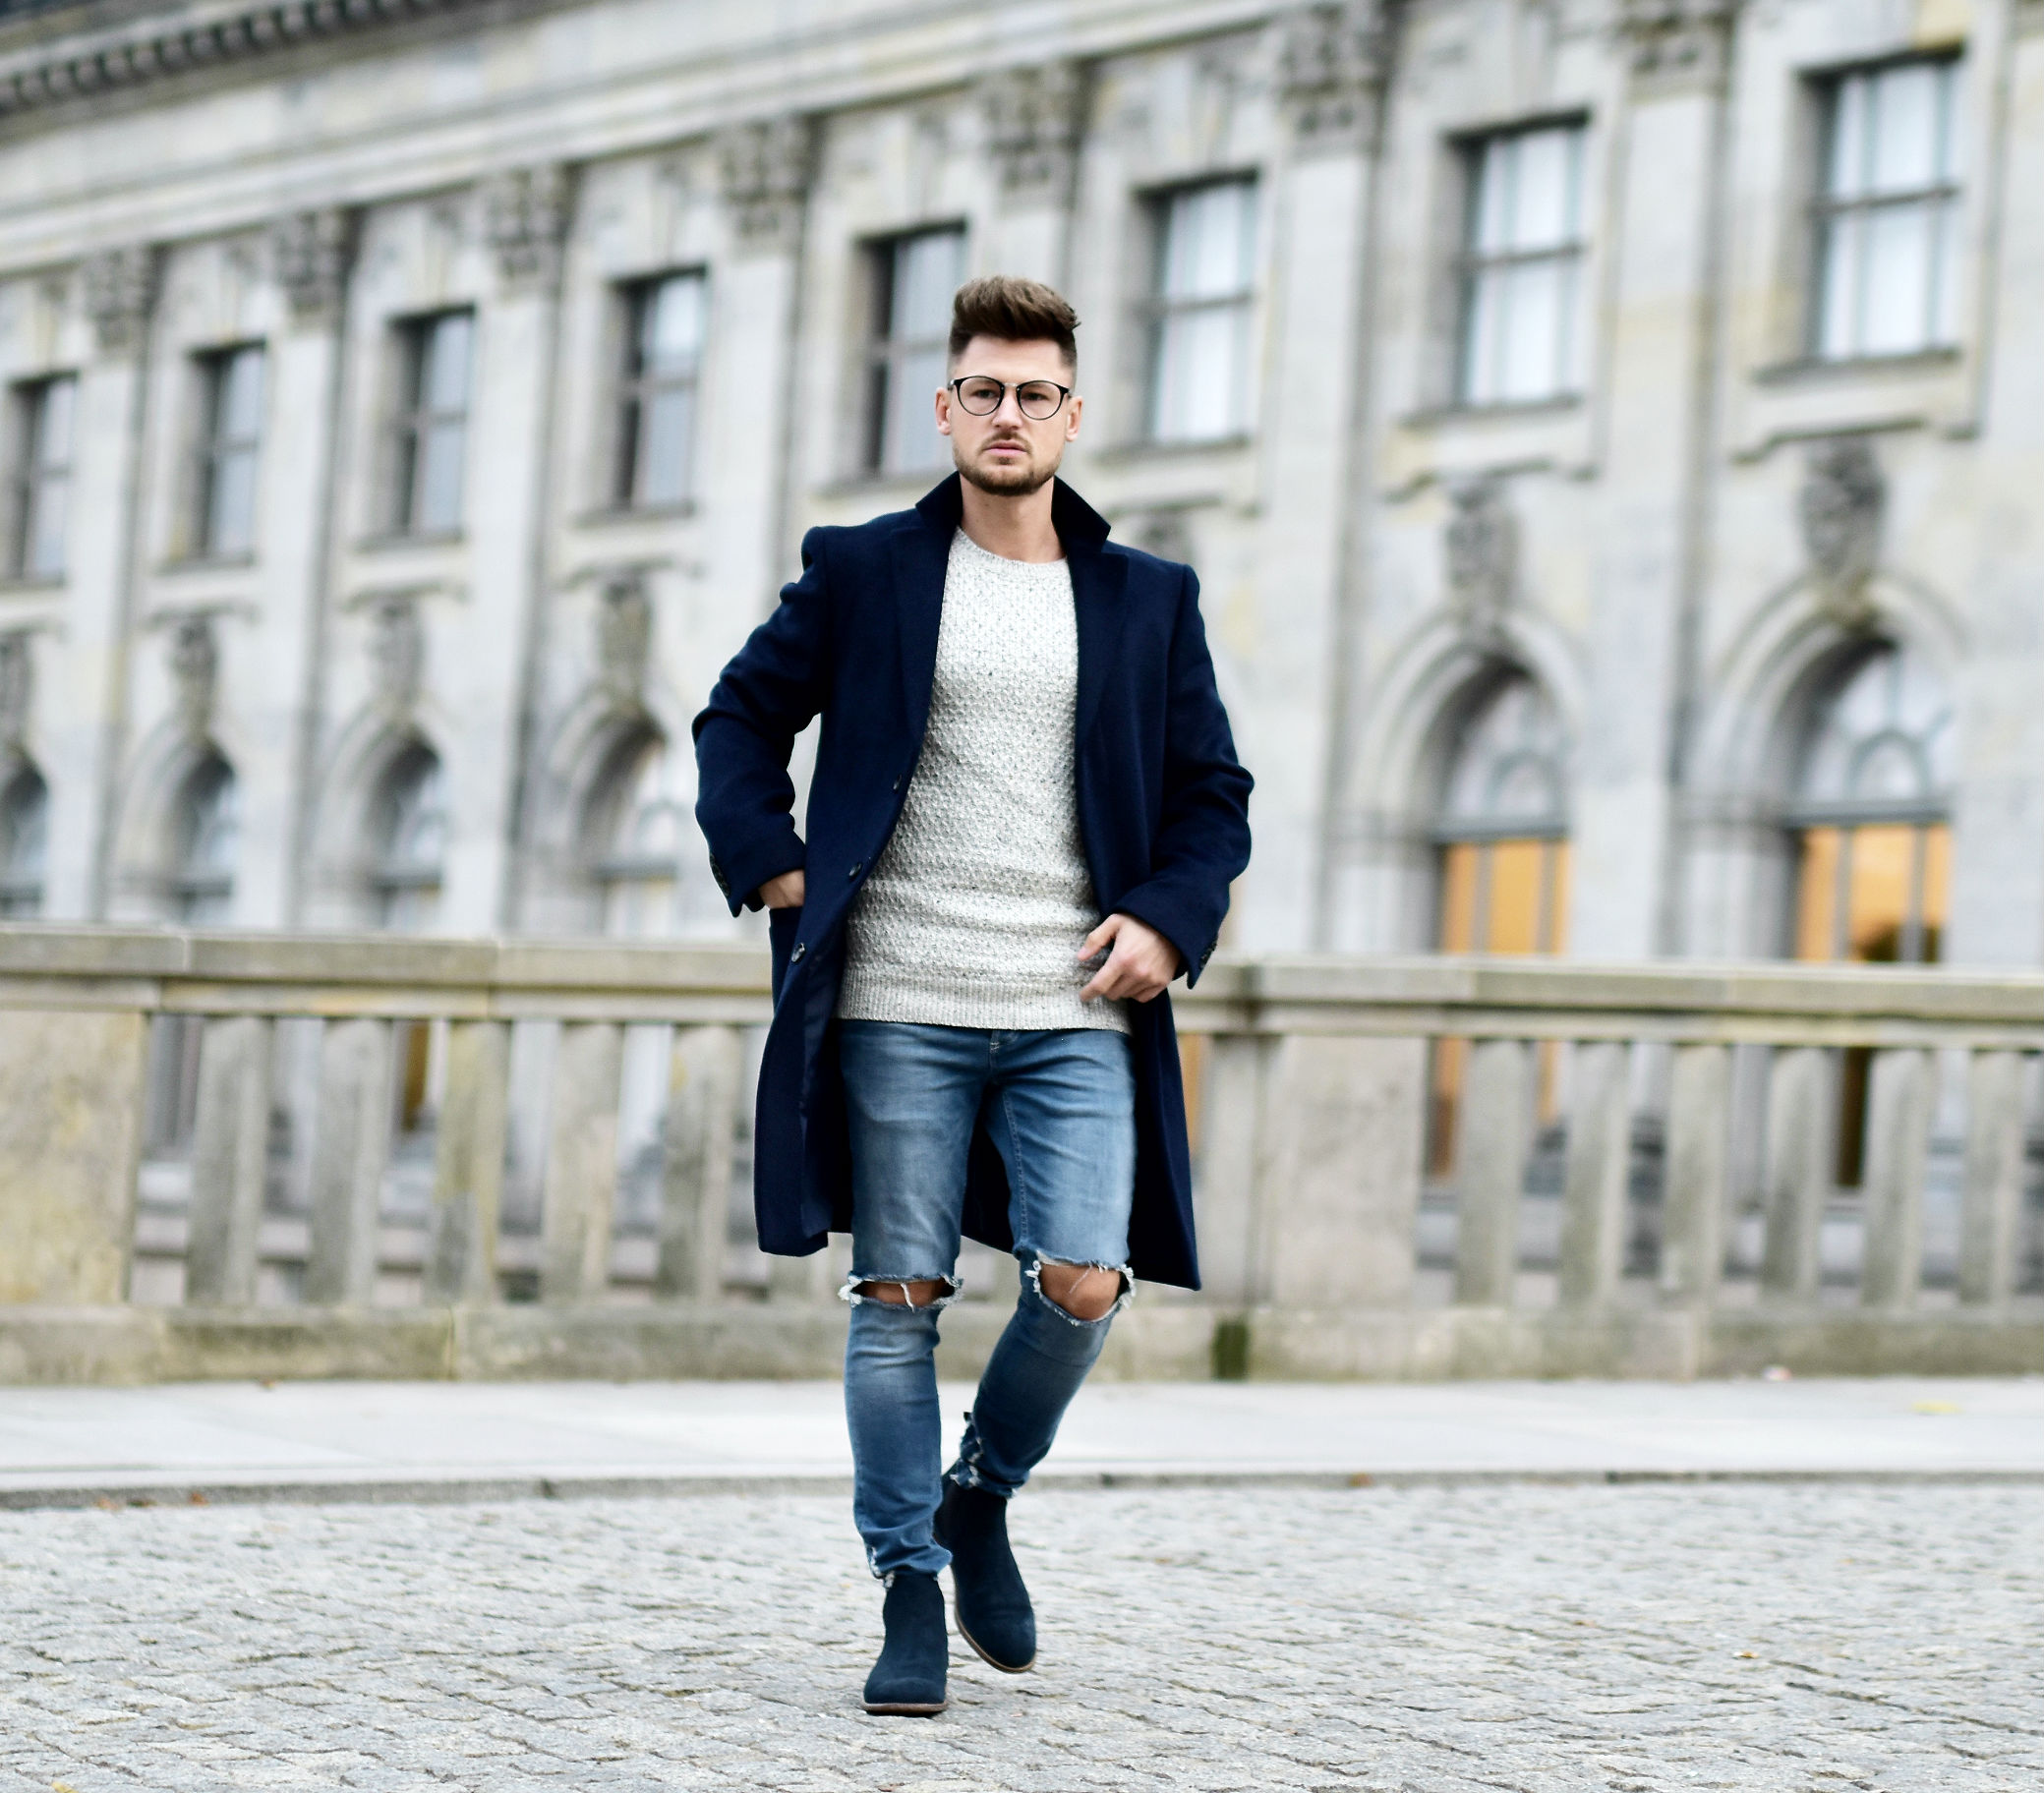 tommeezjerry-styleblog-maennerblog-maenner-modeblog-berlin-berlinblog-maennermodeblog-outfit-mantel-marks-and-spencer-coat-chelsea-boots-autumn-look-3